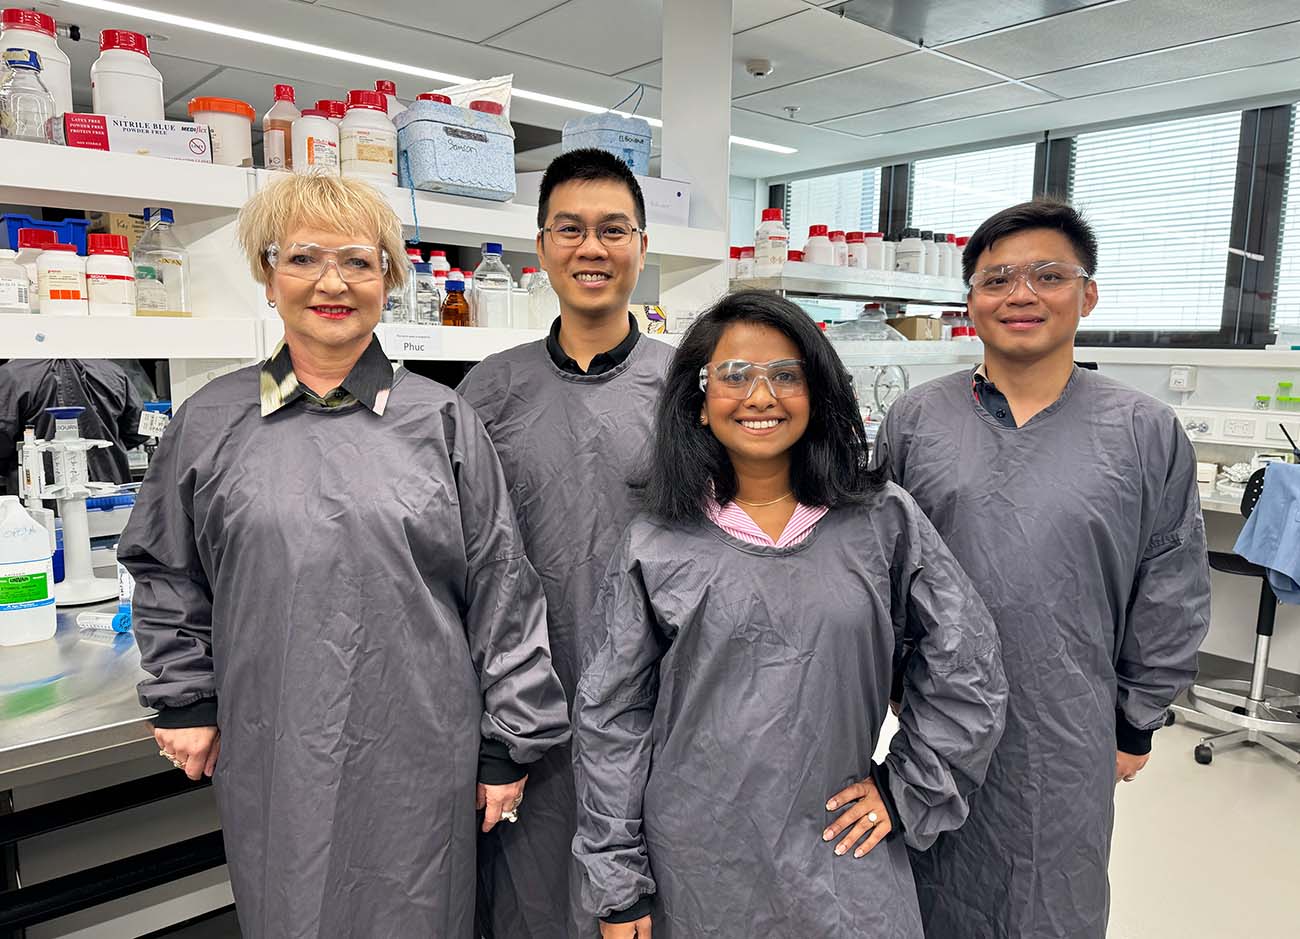 Distinguished Professor Elena Ivanova, Dr Phuc Le, Dr Tharushi Perera and Dr Peter Nguyen in the RMIT lab. Credit: RMIT.